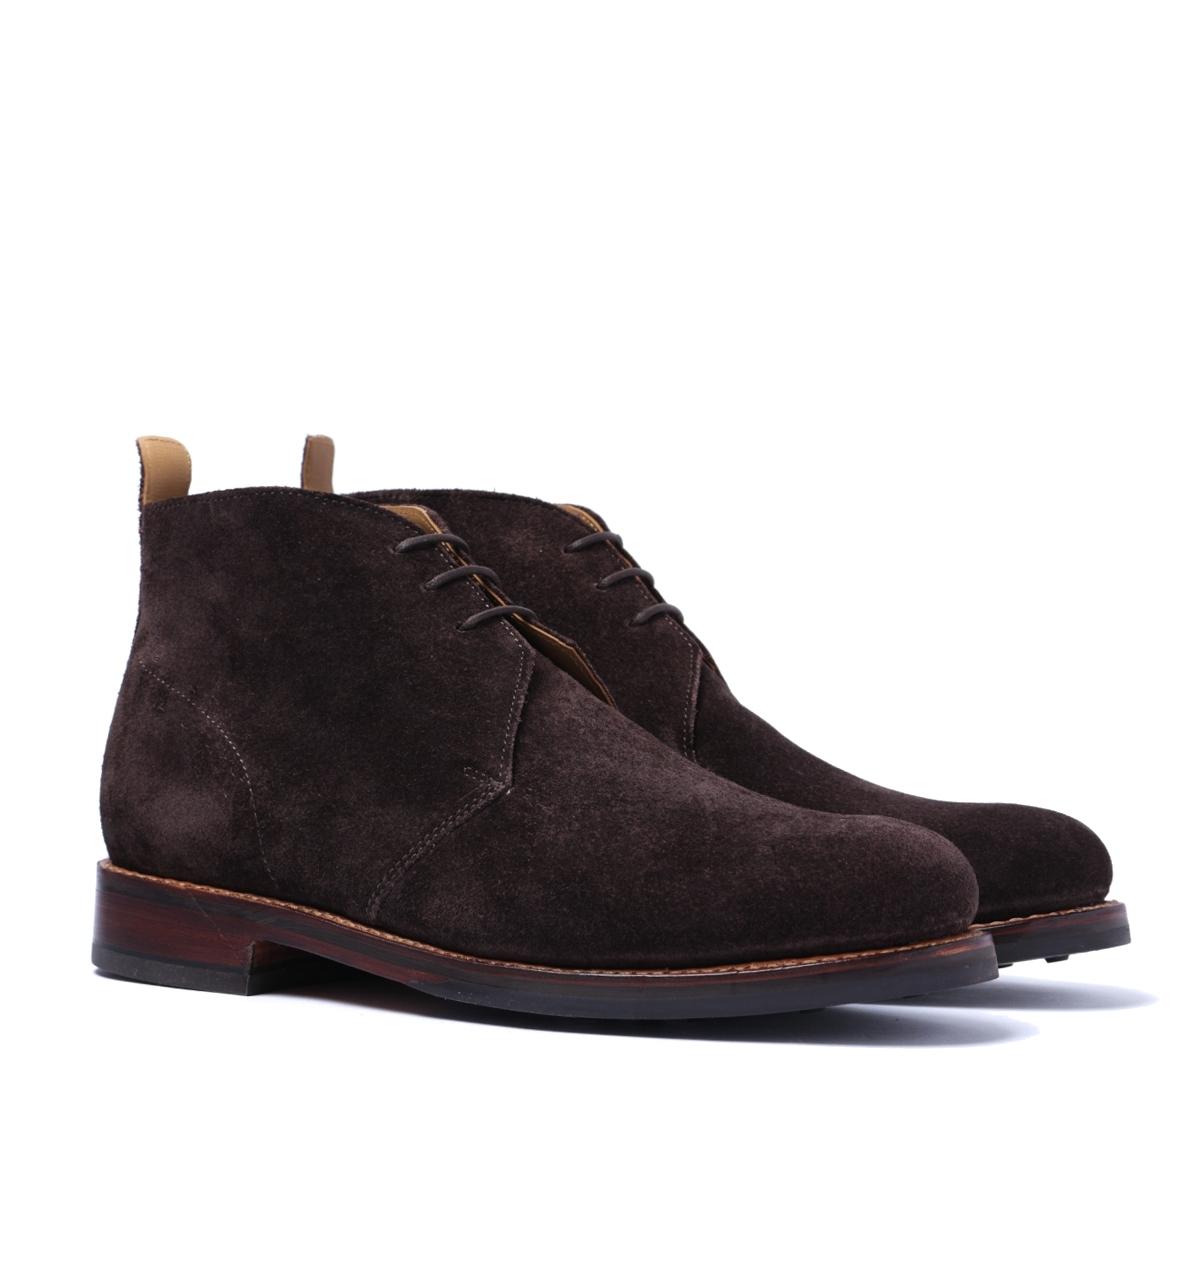 Grenson Wendell Chocolate Suede Chukka Boots in Brown for Men - Lyst